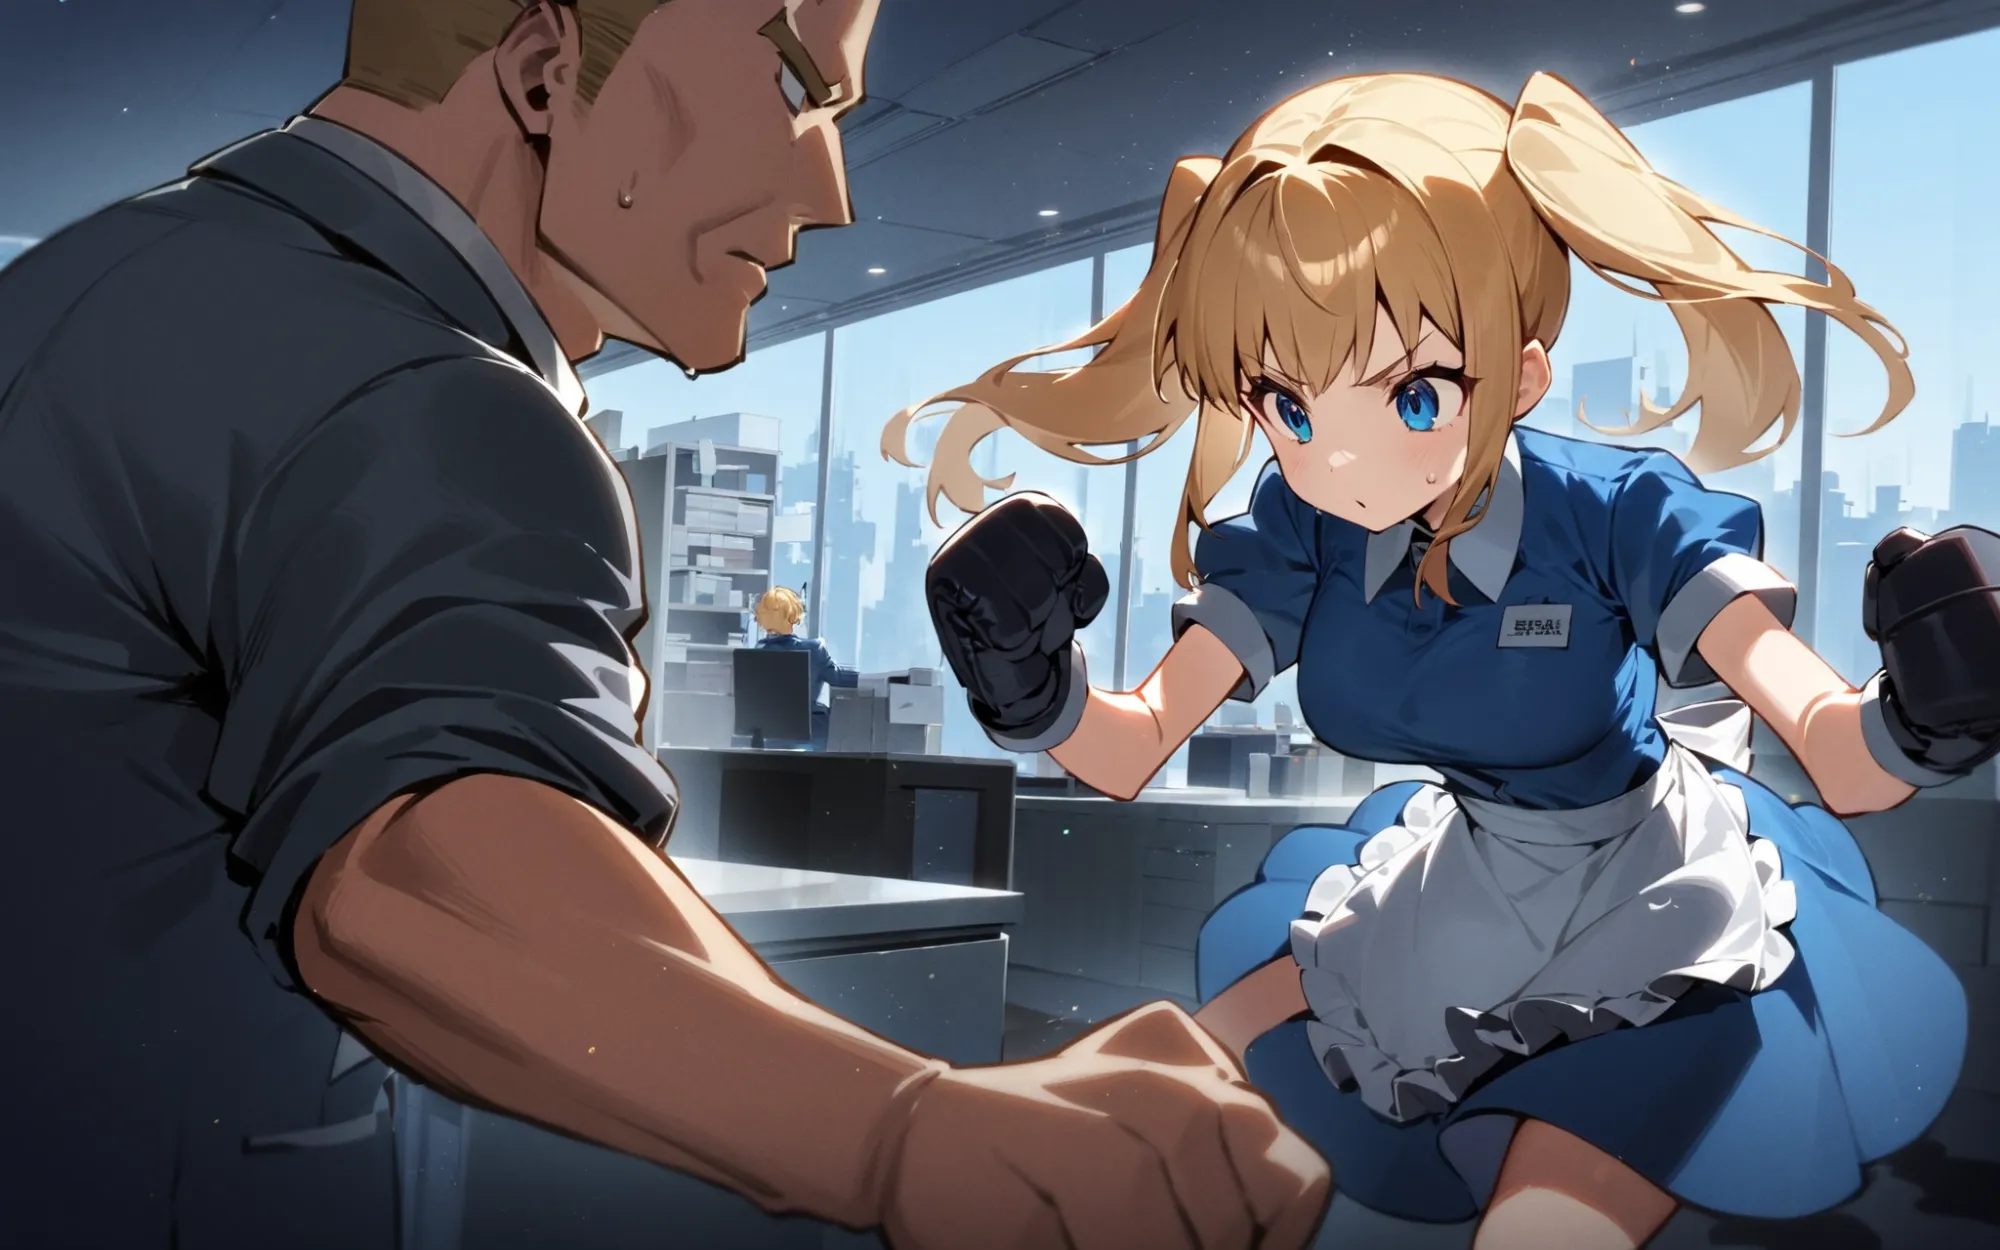 '1girl boxing with her boss, \nblonde hair, twintails, blue dress, white apron, indoors, office, office suit,\nAlice in glitterworld\nNegative prompt: (worst quality, low quality:1.4), nsfw\nSteps: 30, Sampler: DPM++ 2M Karras, CFG scale: 7, Seed: 1, Size: 1024x640, Model hash: 642b08ca49, Model: ConfusionXL2.0_fp16_vae, Denoising strength: 0.6, Clip skip: 2, Hires upscale: 2, Hires upscaler: ESRGAN_4x, Version: v1.7.0'